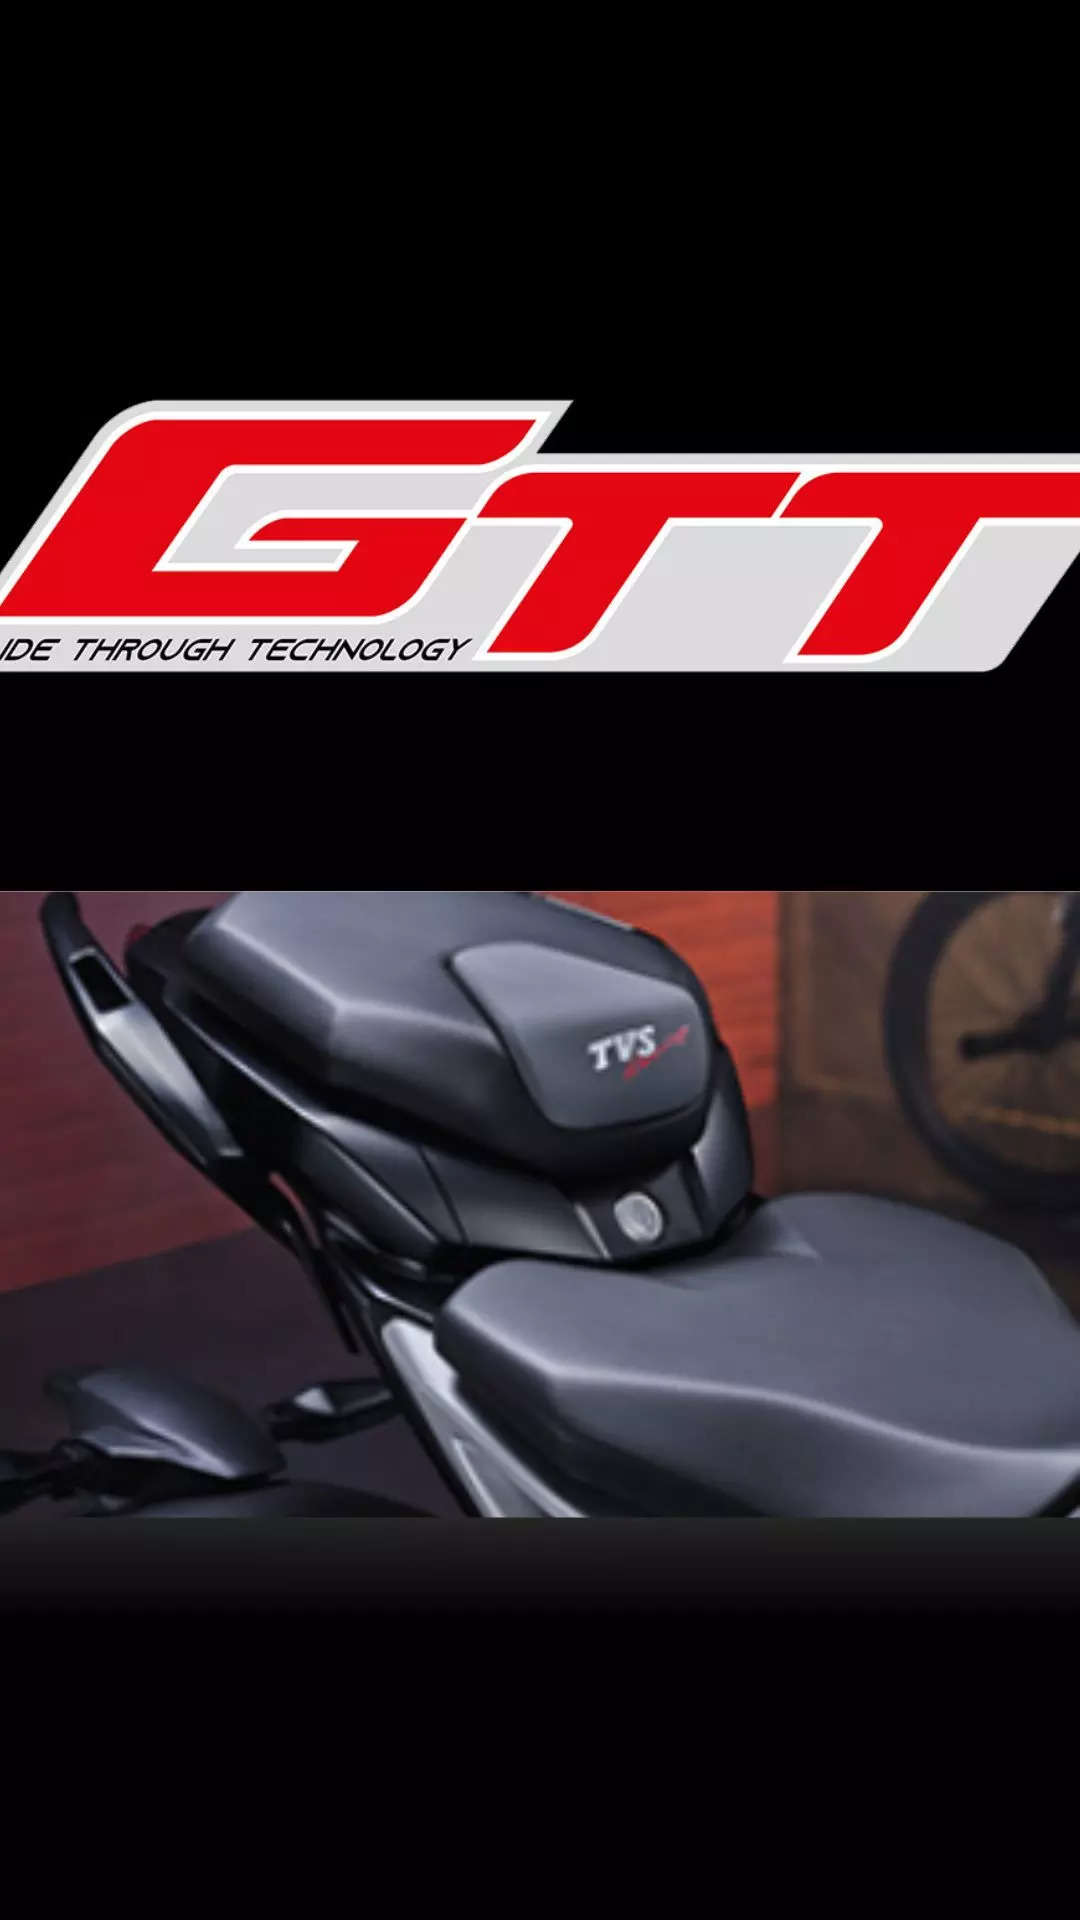 India's 1st ethanol-powered bike: Here's all you need to know about TVS  Apache RTR 200 Fi E100 - IBTimes India